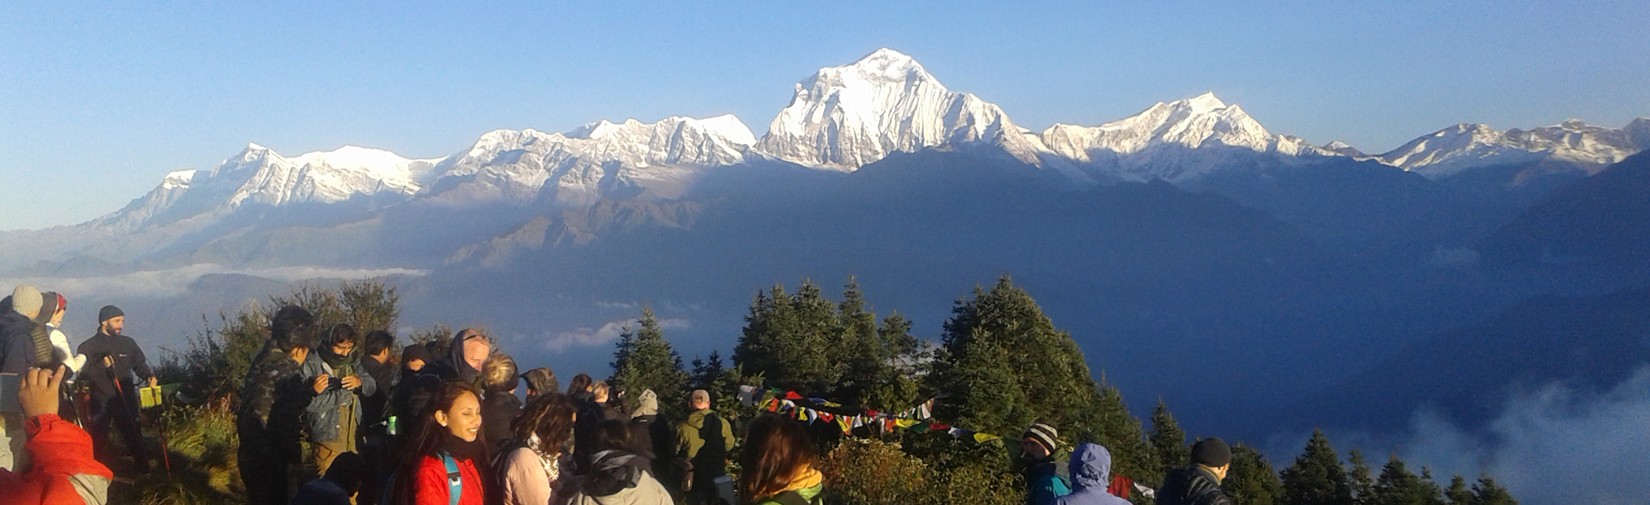 Ghorepani-Poon-Hill-Trek-travelers-watching-sunrise-view-from-poon-hill-view-point